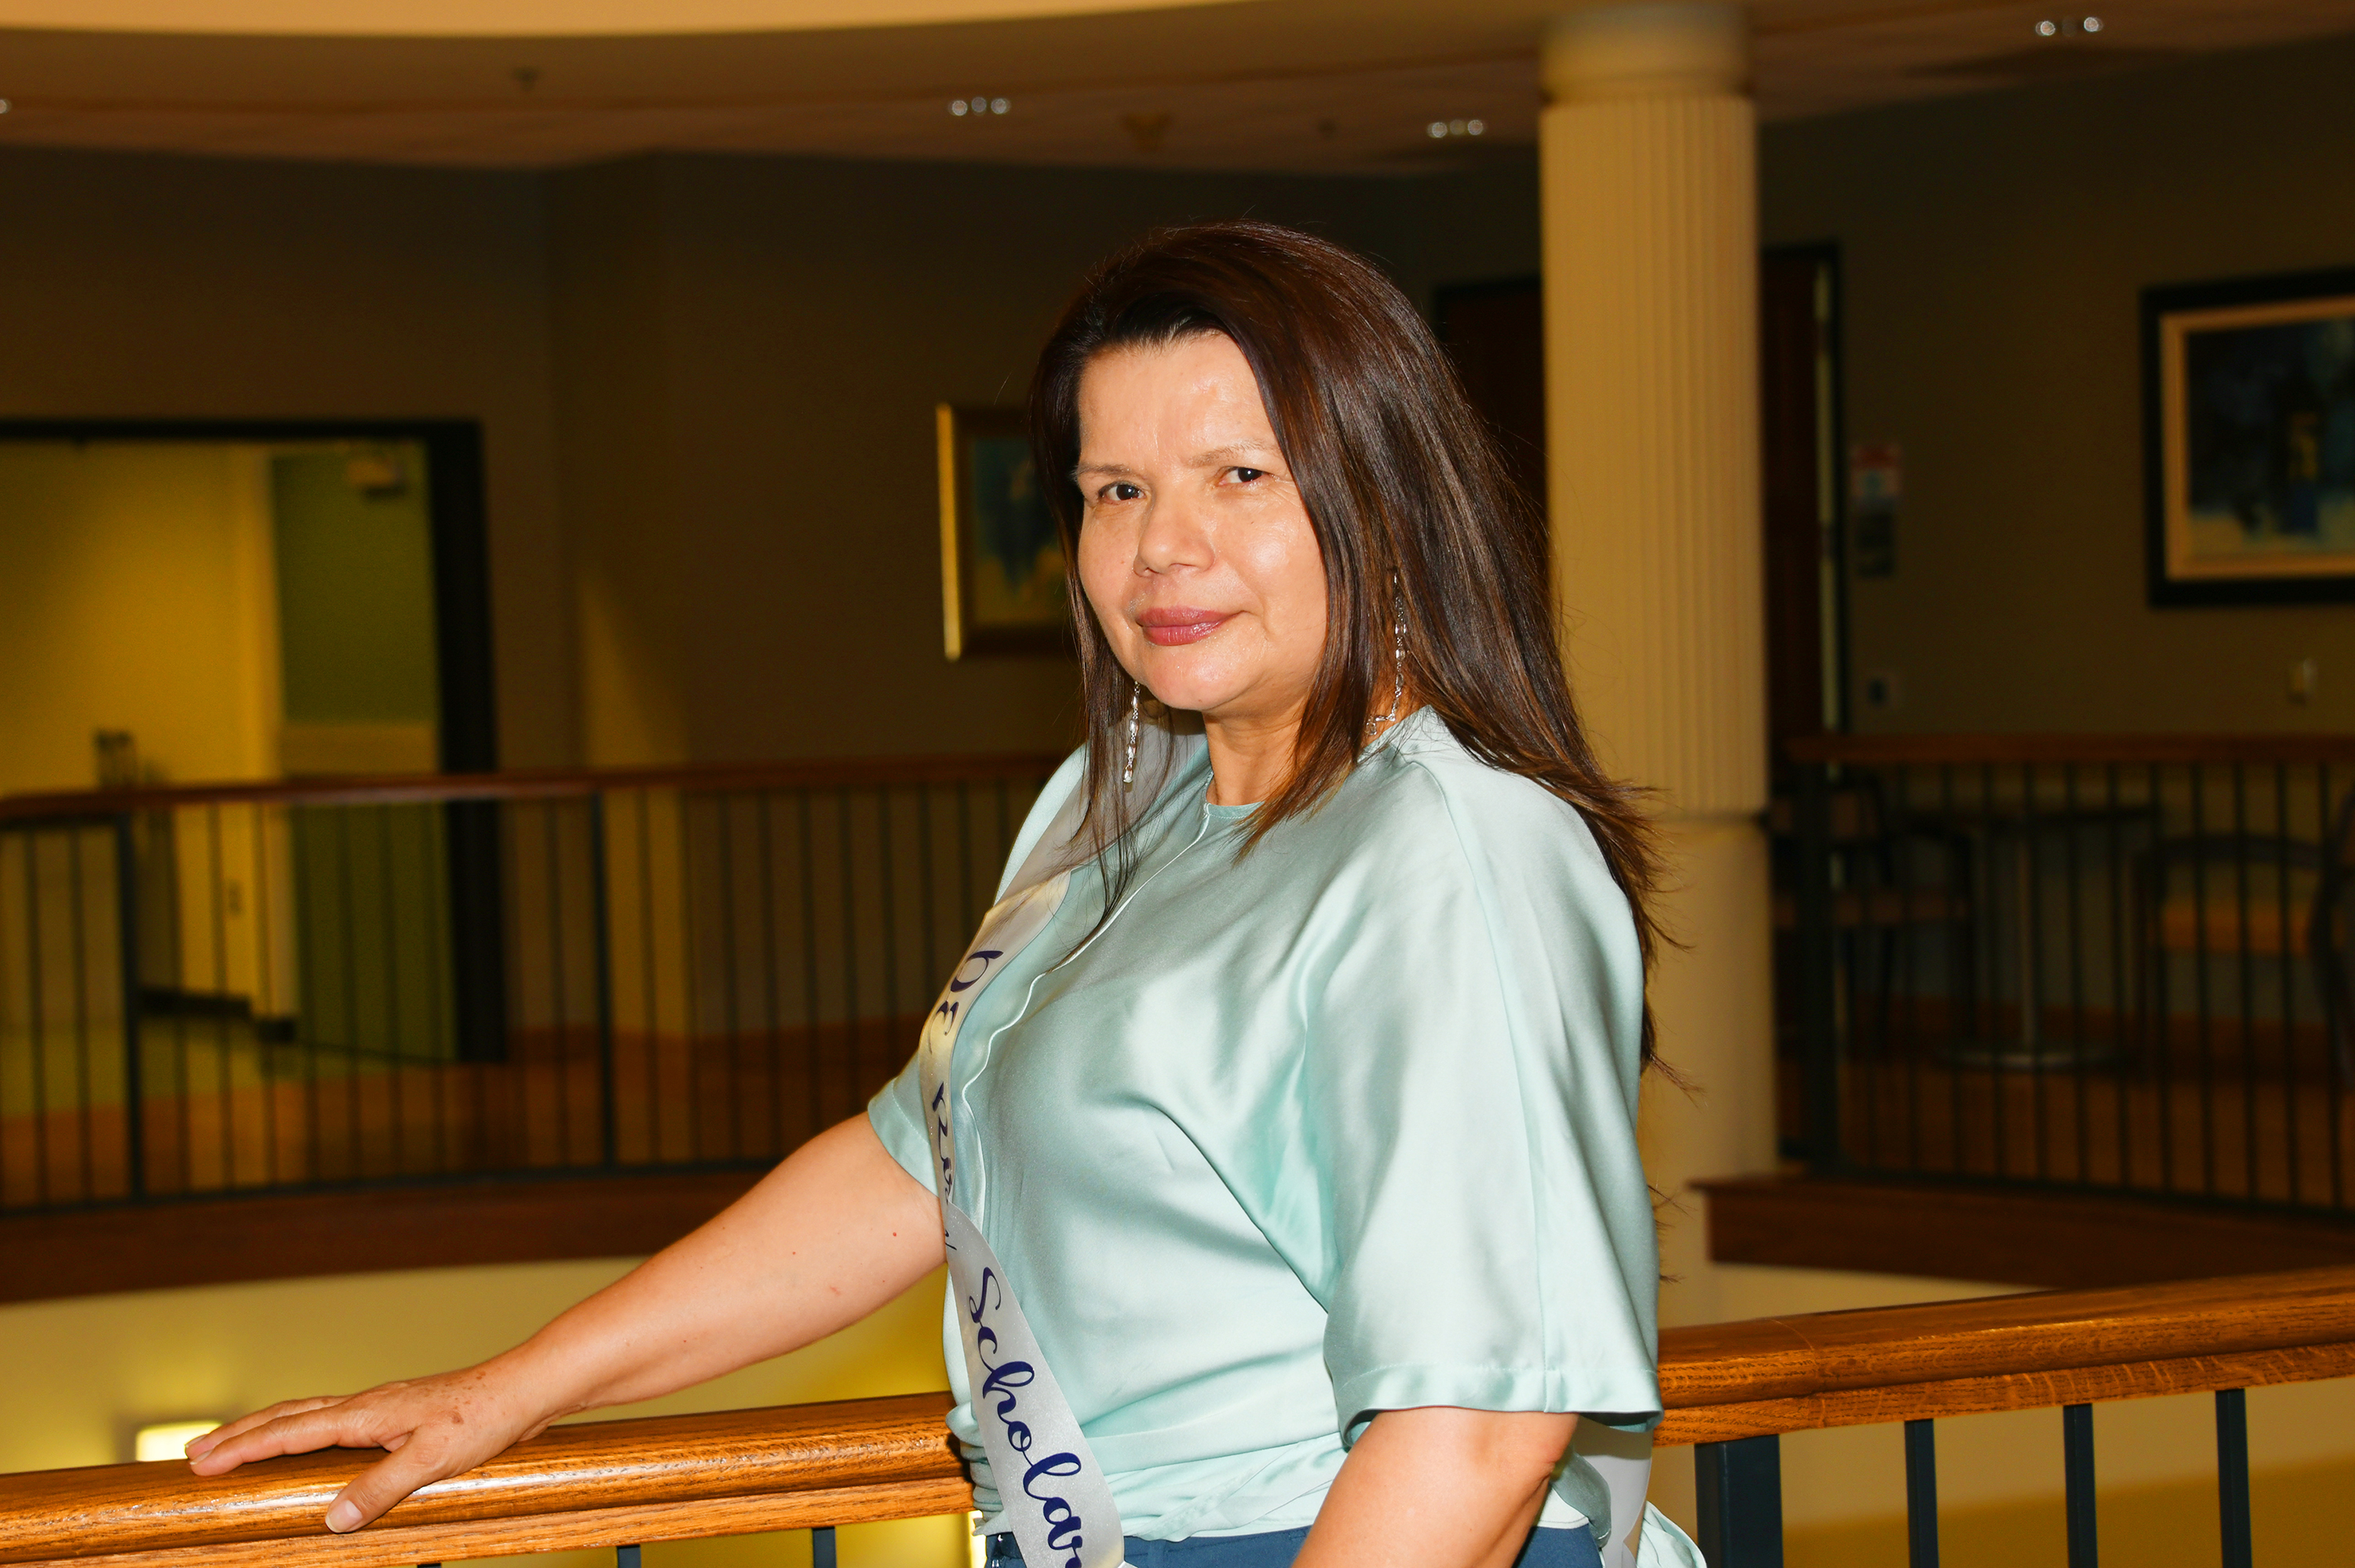 Luz Quiroga worked hard to learn English, and now after earning two degrees, she has aspiration to pursue a master's degree.